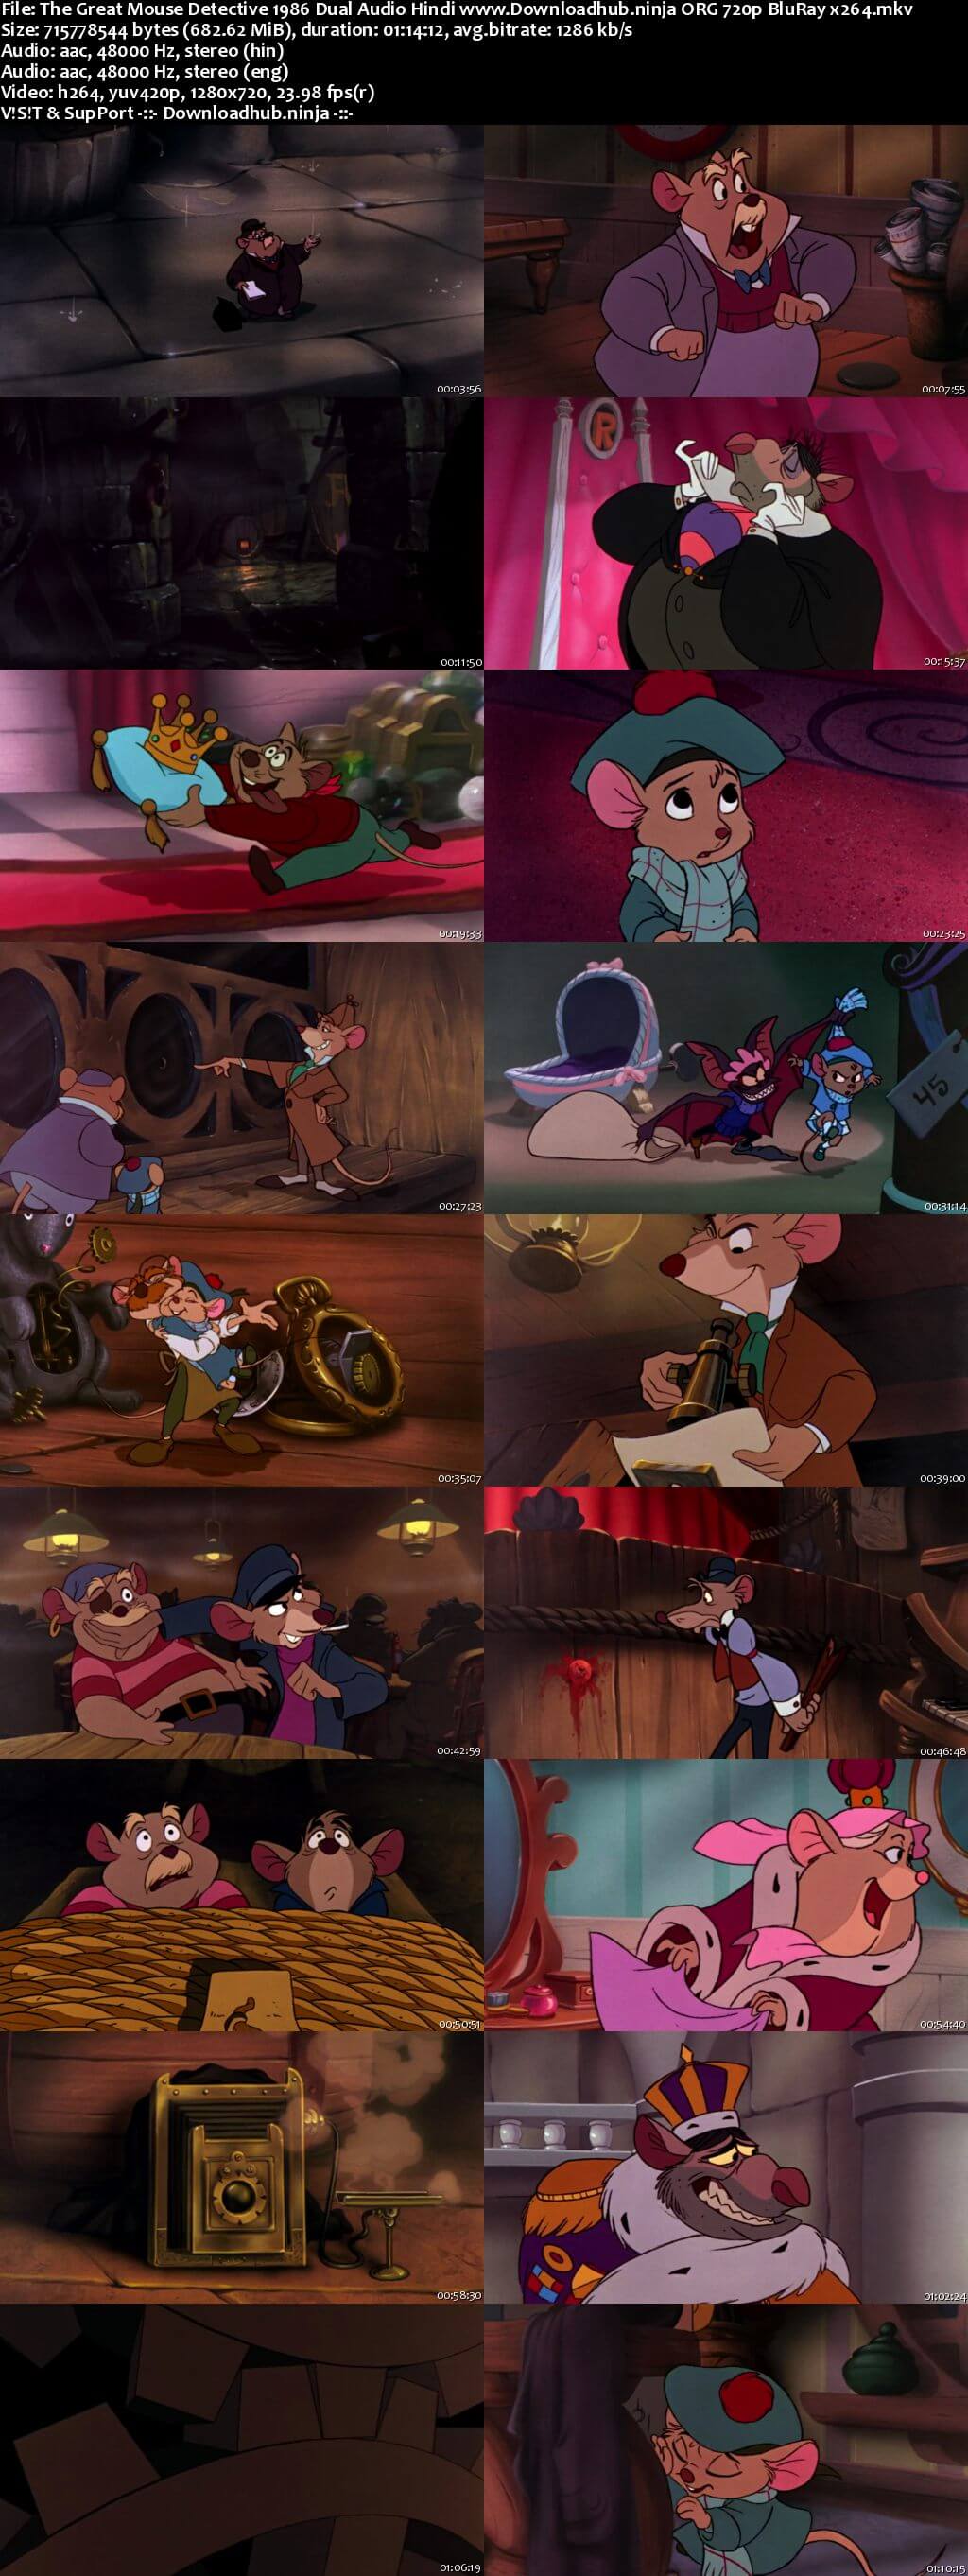 The Great Mouse Detective 1986 Hindi Dual Audio 720p BluRay x264